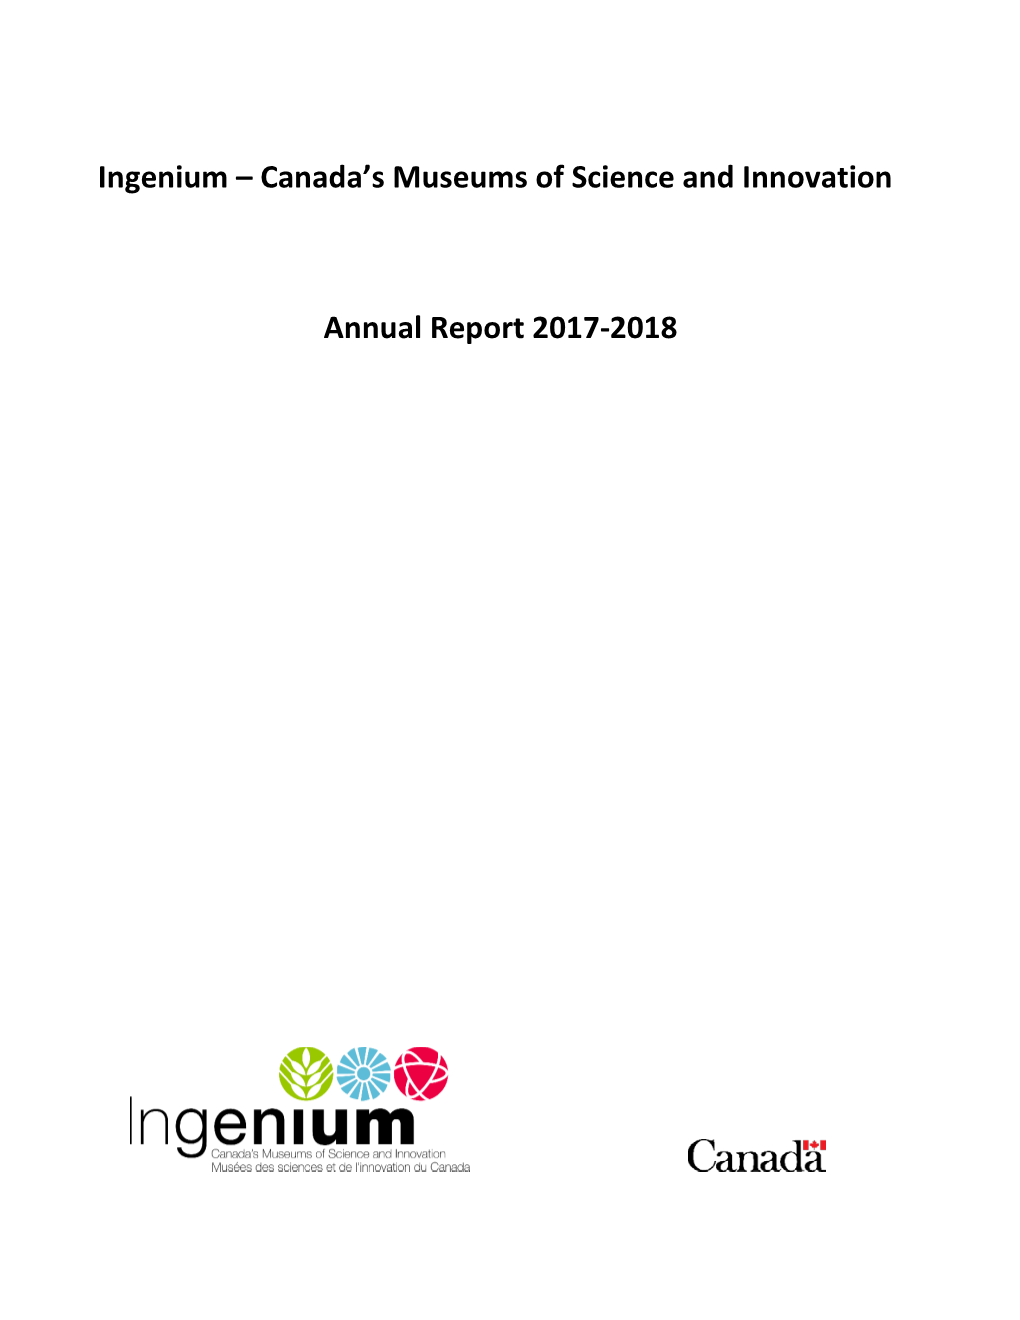 Canada's Museums of Science and Innovation Annual